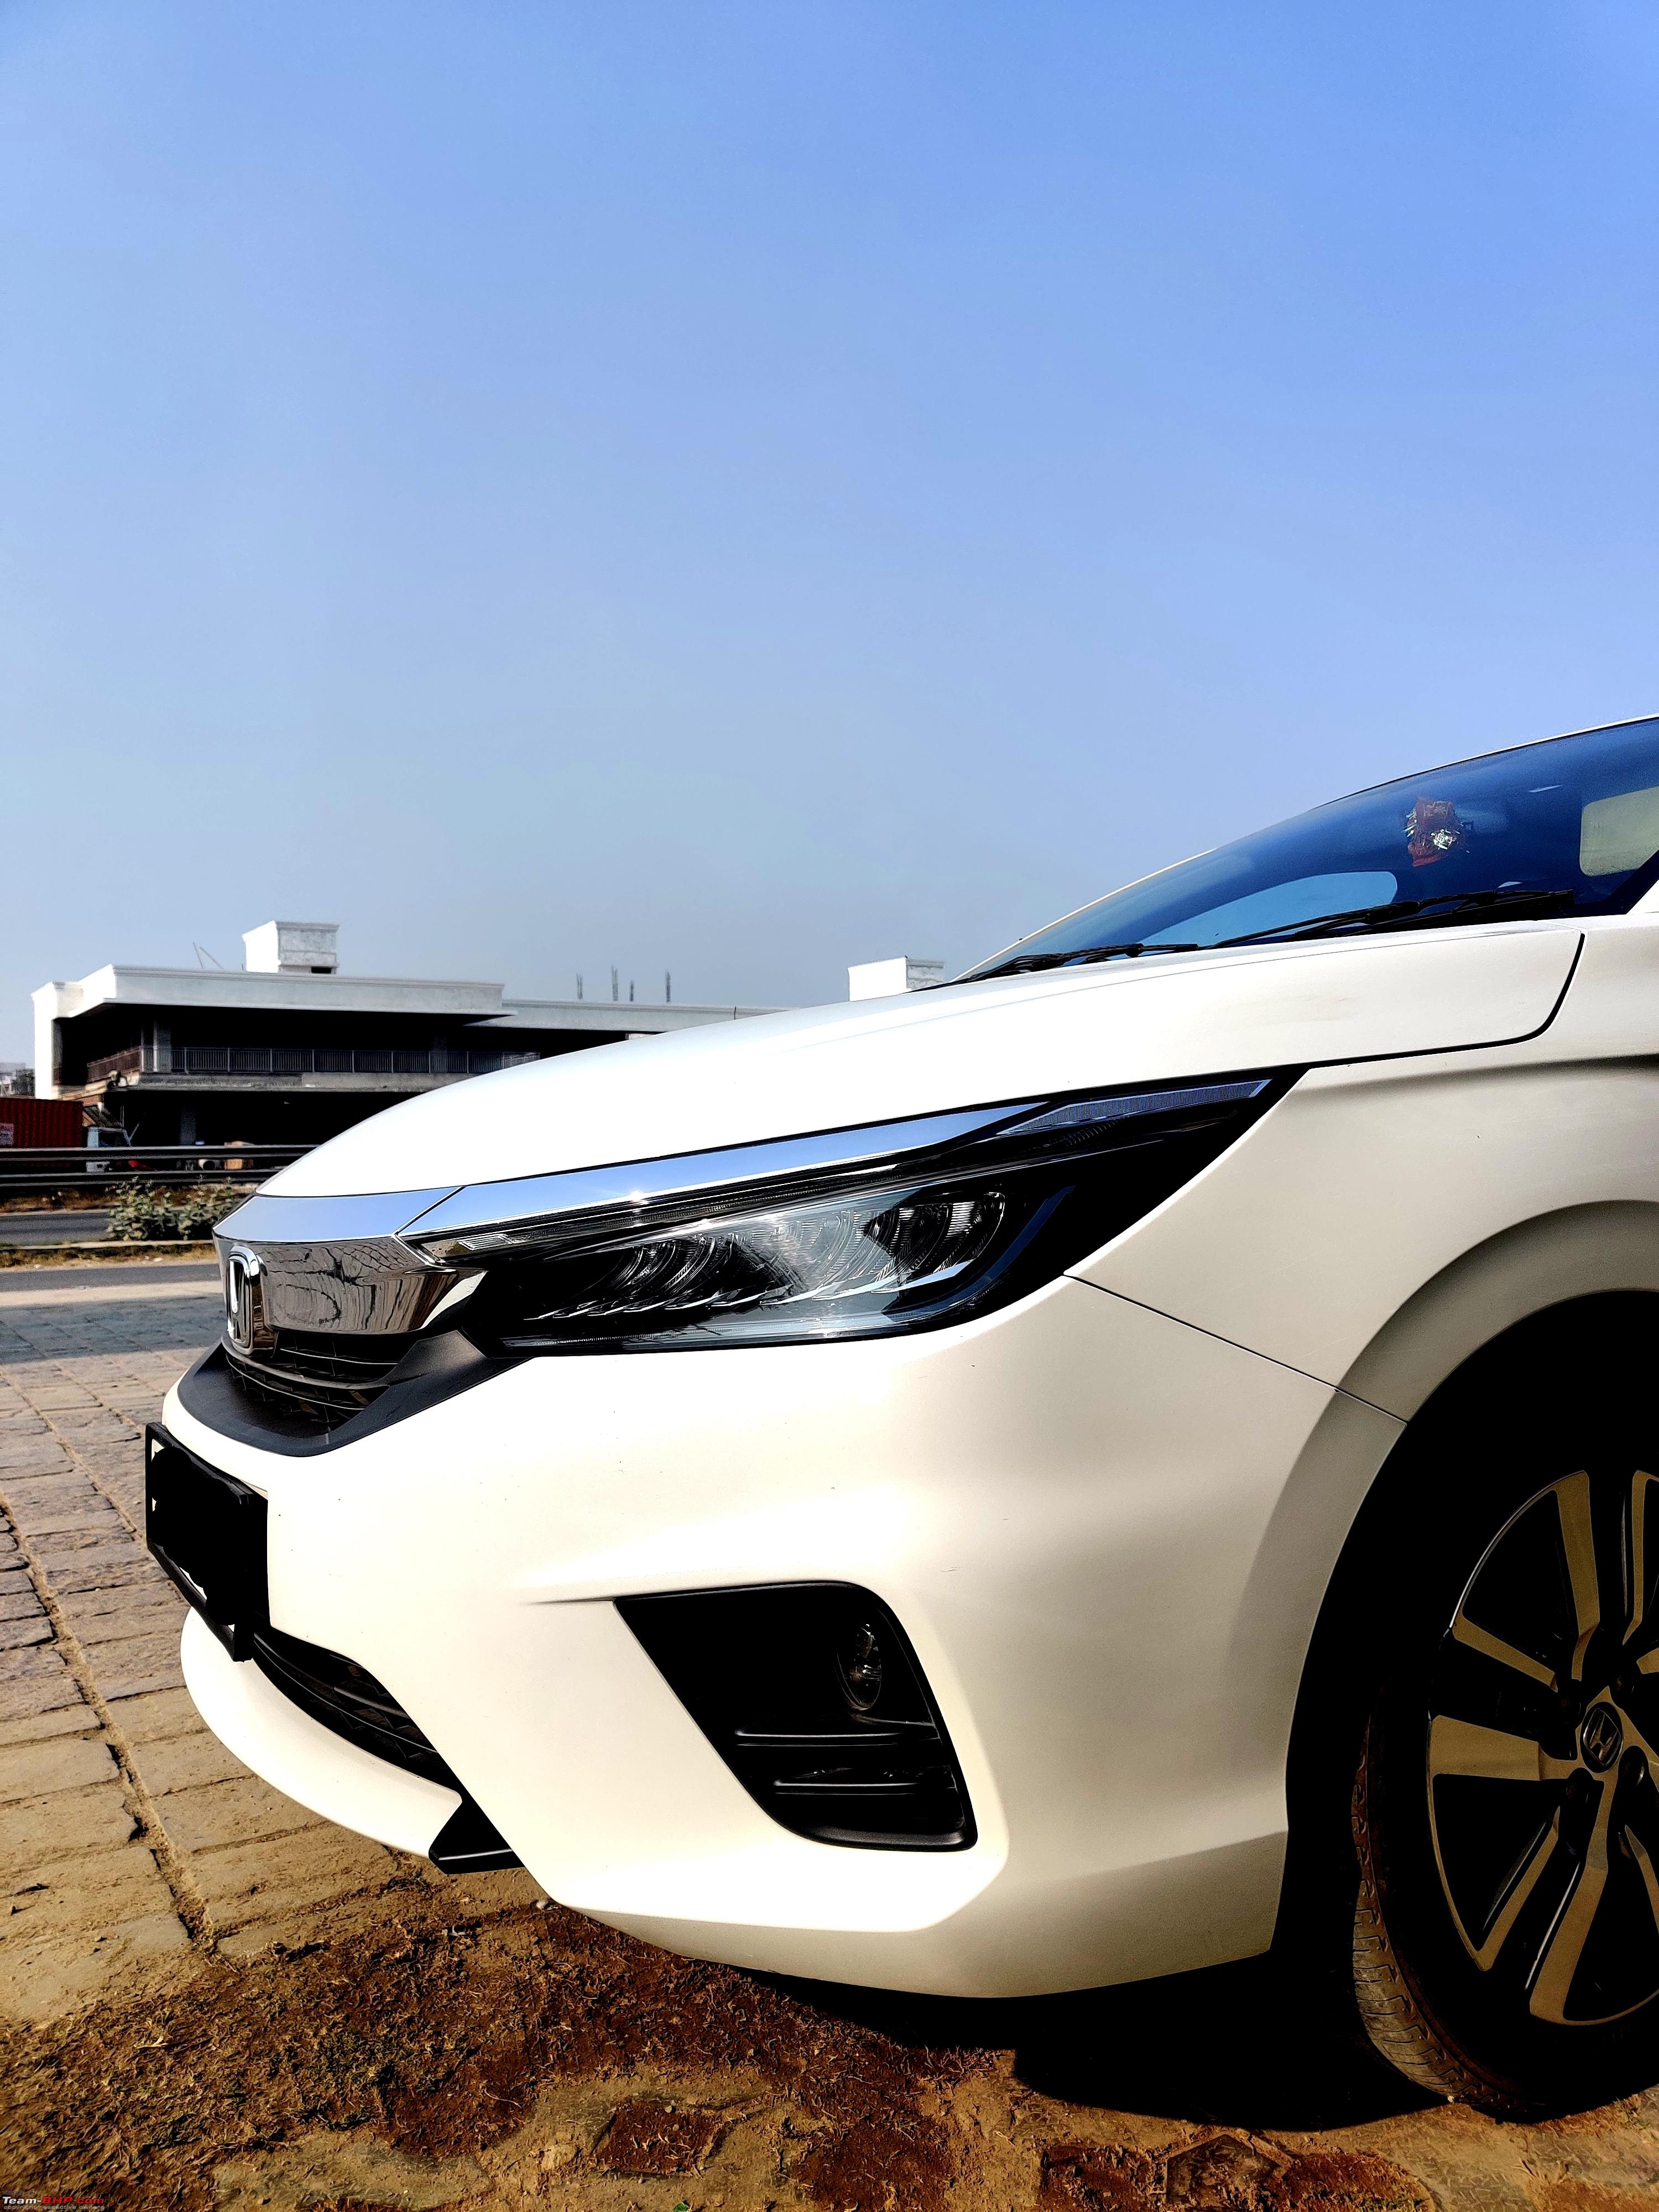 https://www.team-bhp.com/forum/attachments/test-drives-initial-ownership-reports/2255608d1641566491-5th-gen-honda-city-one-year-ownership-review-1st-major-service-experience-1641565400242.jpg